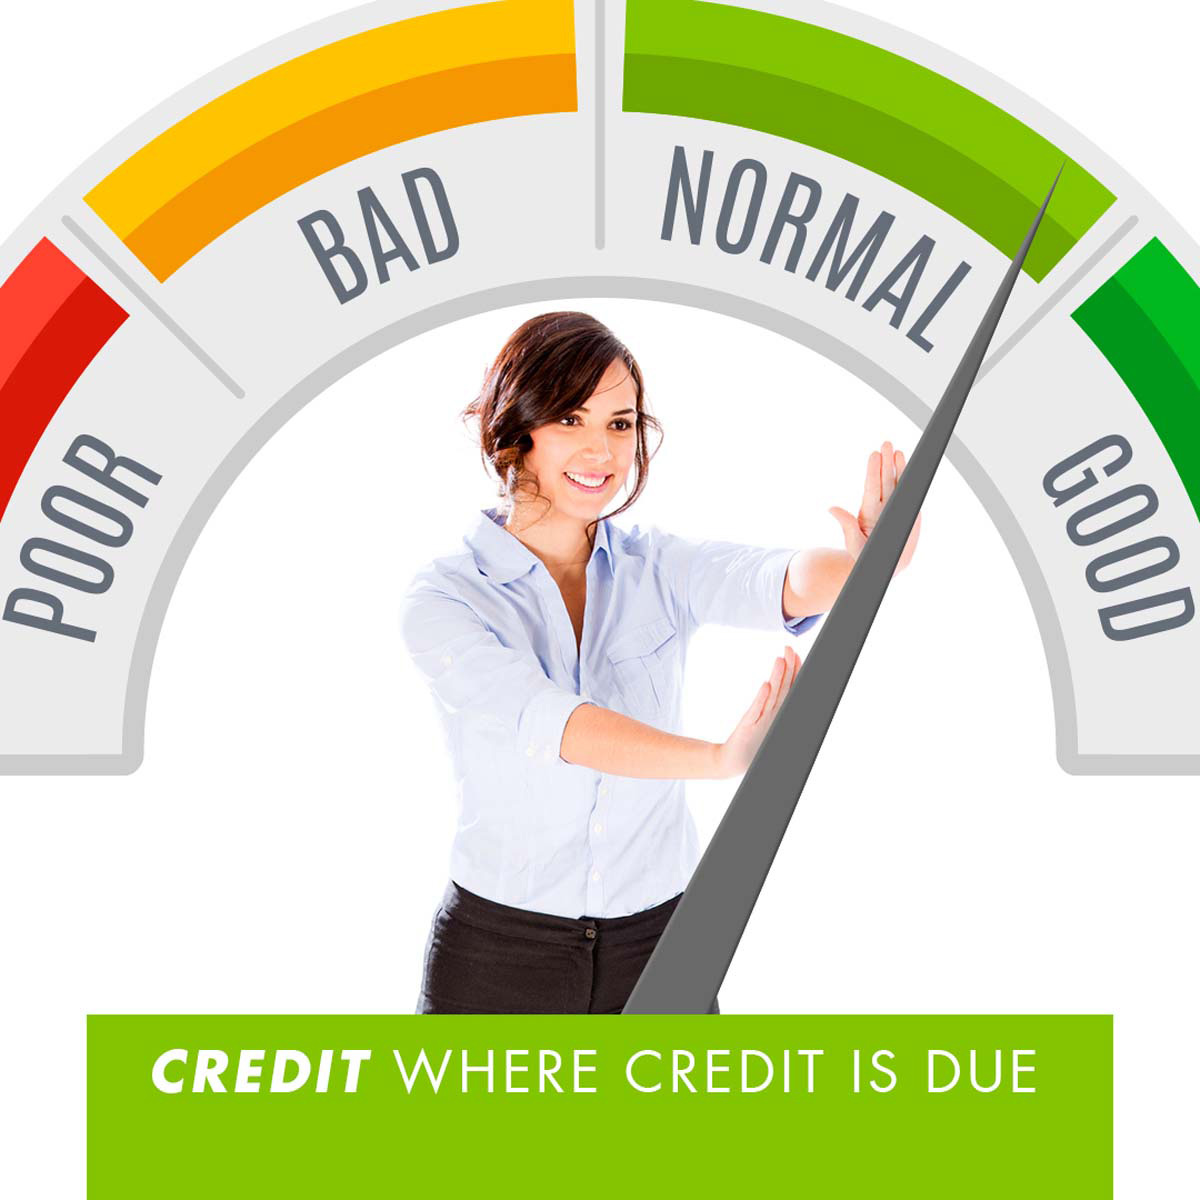 Take credit for your outstanding credit score! Work with me on your next primary, secondary, or investment home and get the outstanding rate you deserve. DM for details. #creditscore #bettercredit